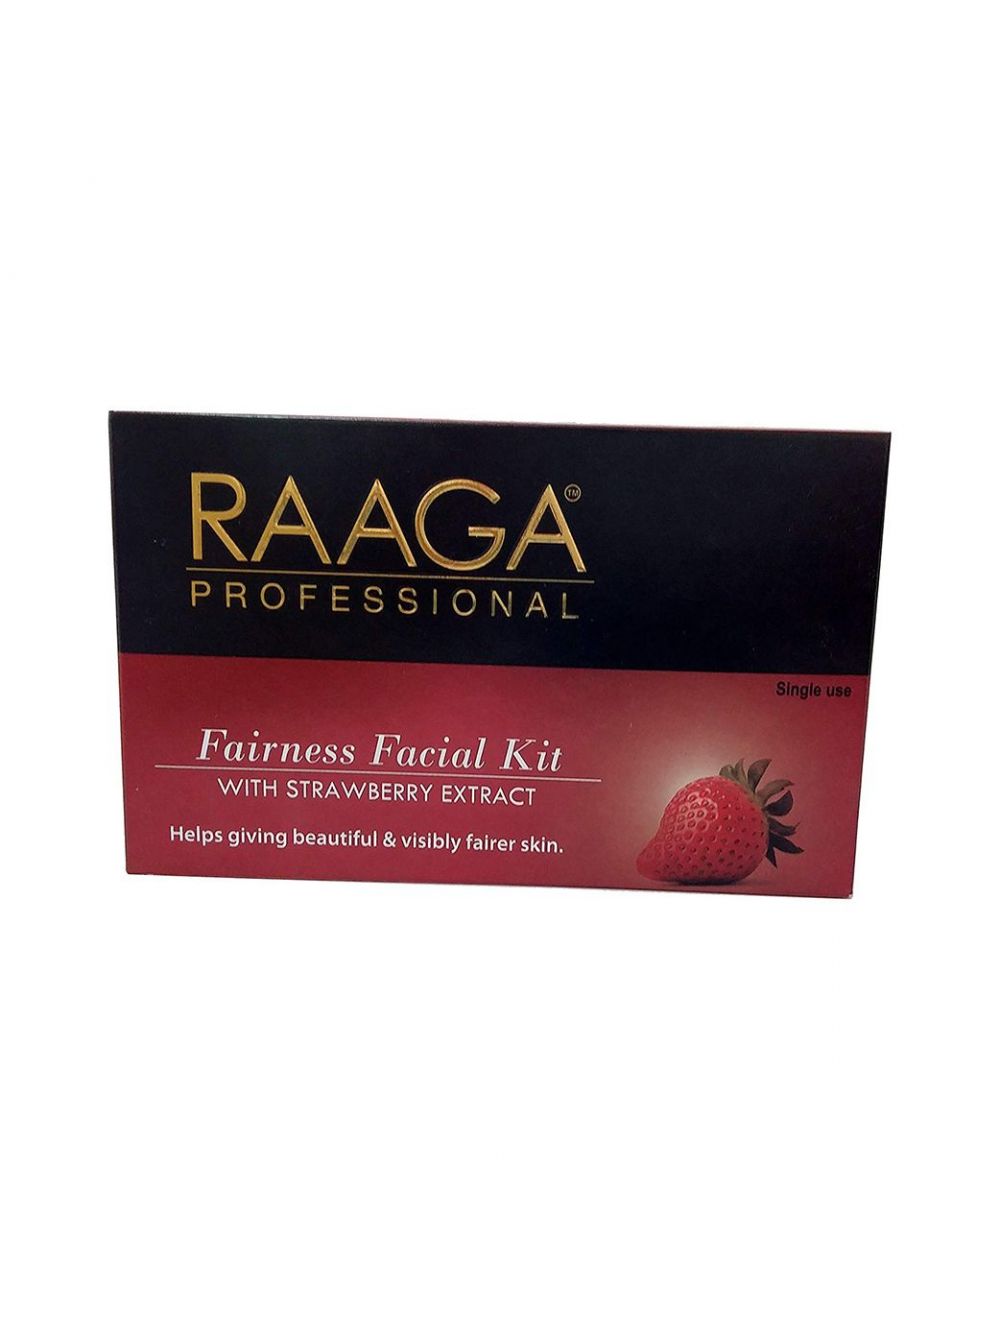 Raaga Professional Fairness Facial Kit With Strawberry Extract